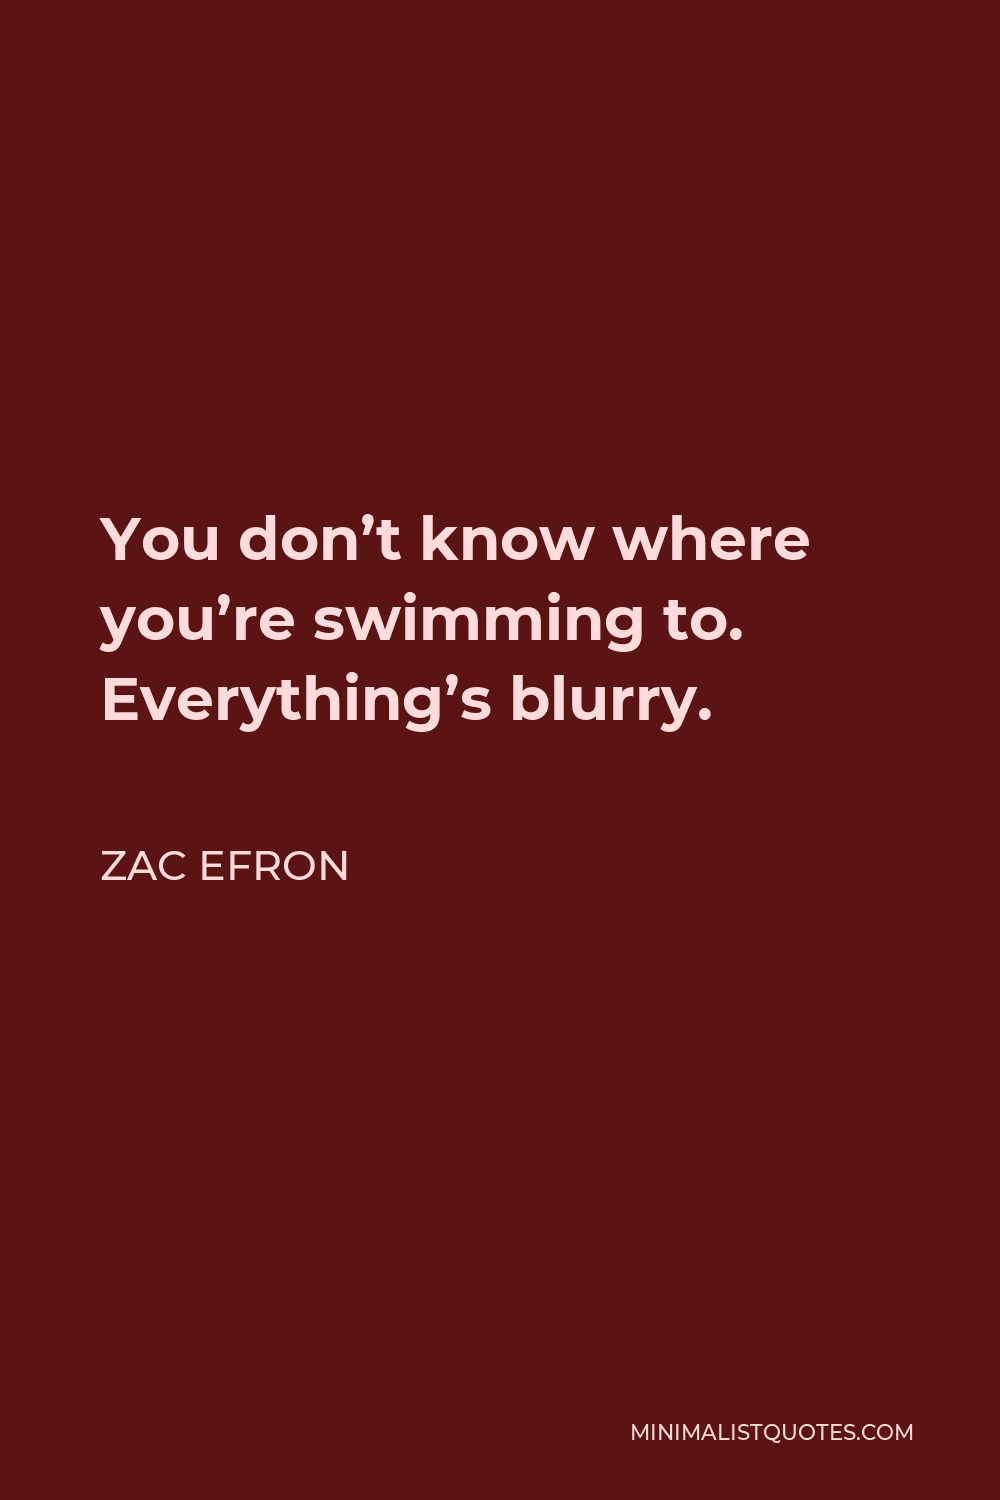 Zac Efron Quote - You don’t know where you’re swimming to. Everything’s blurry.